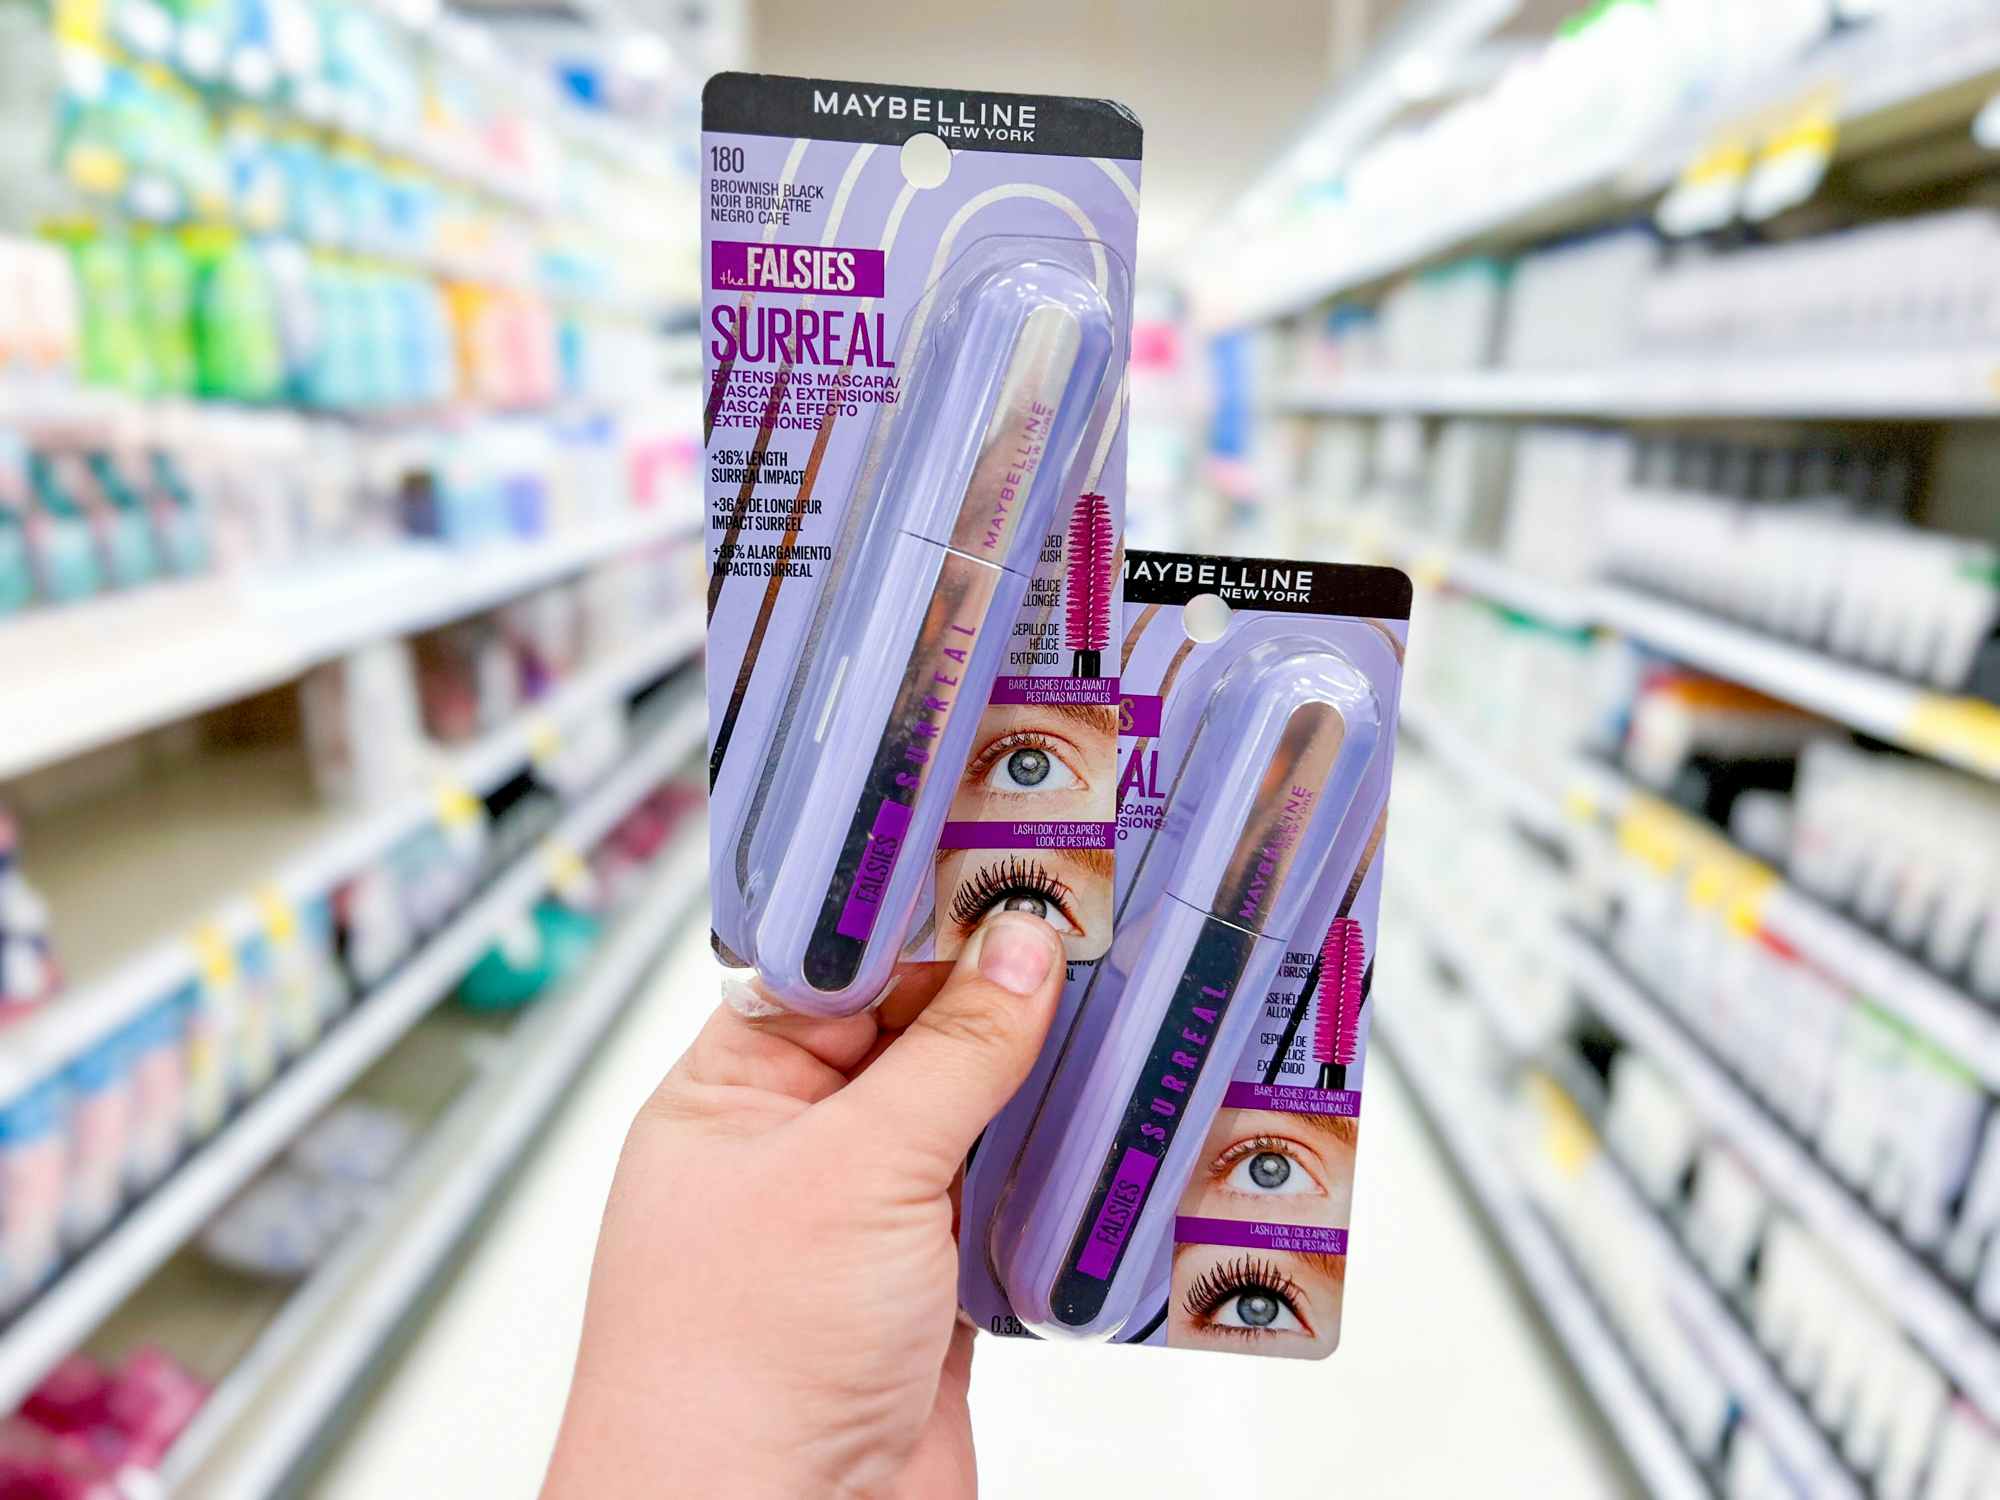 Falsies Surreal for Coupon - Target: Extensions The at Lady $9.99 NEW Krazy Mascara